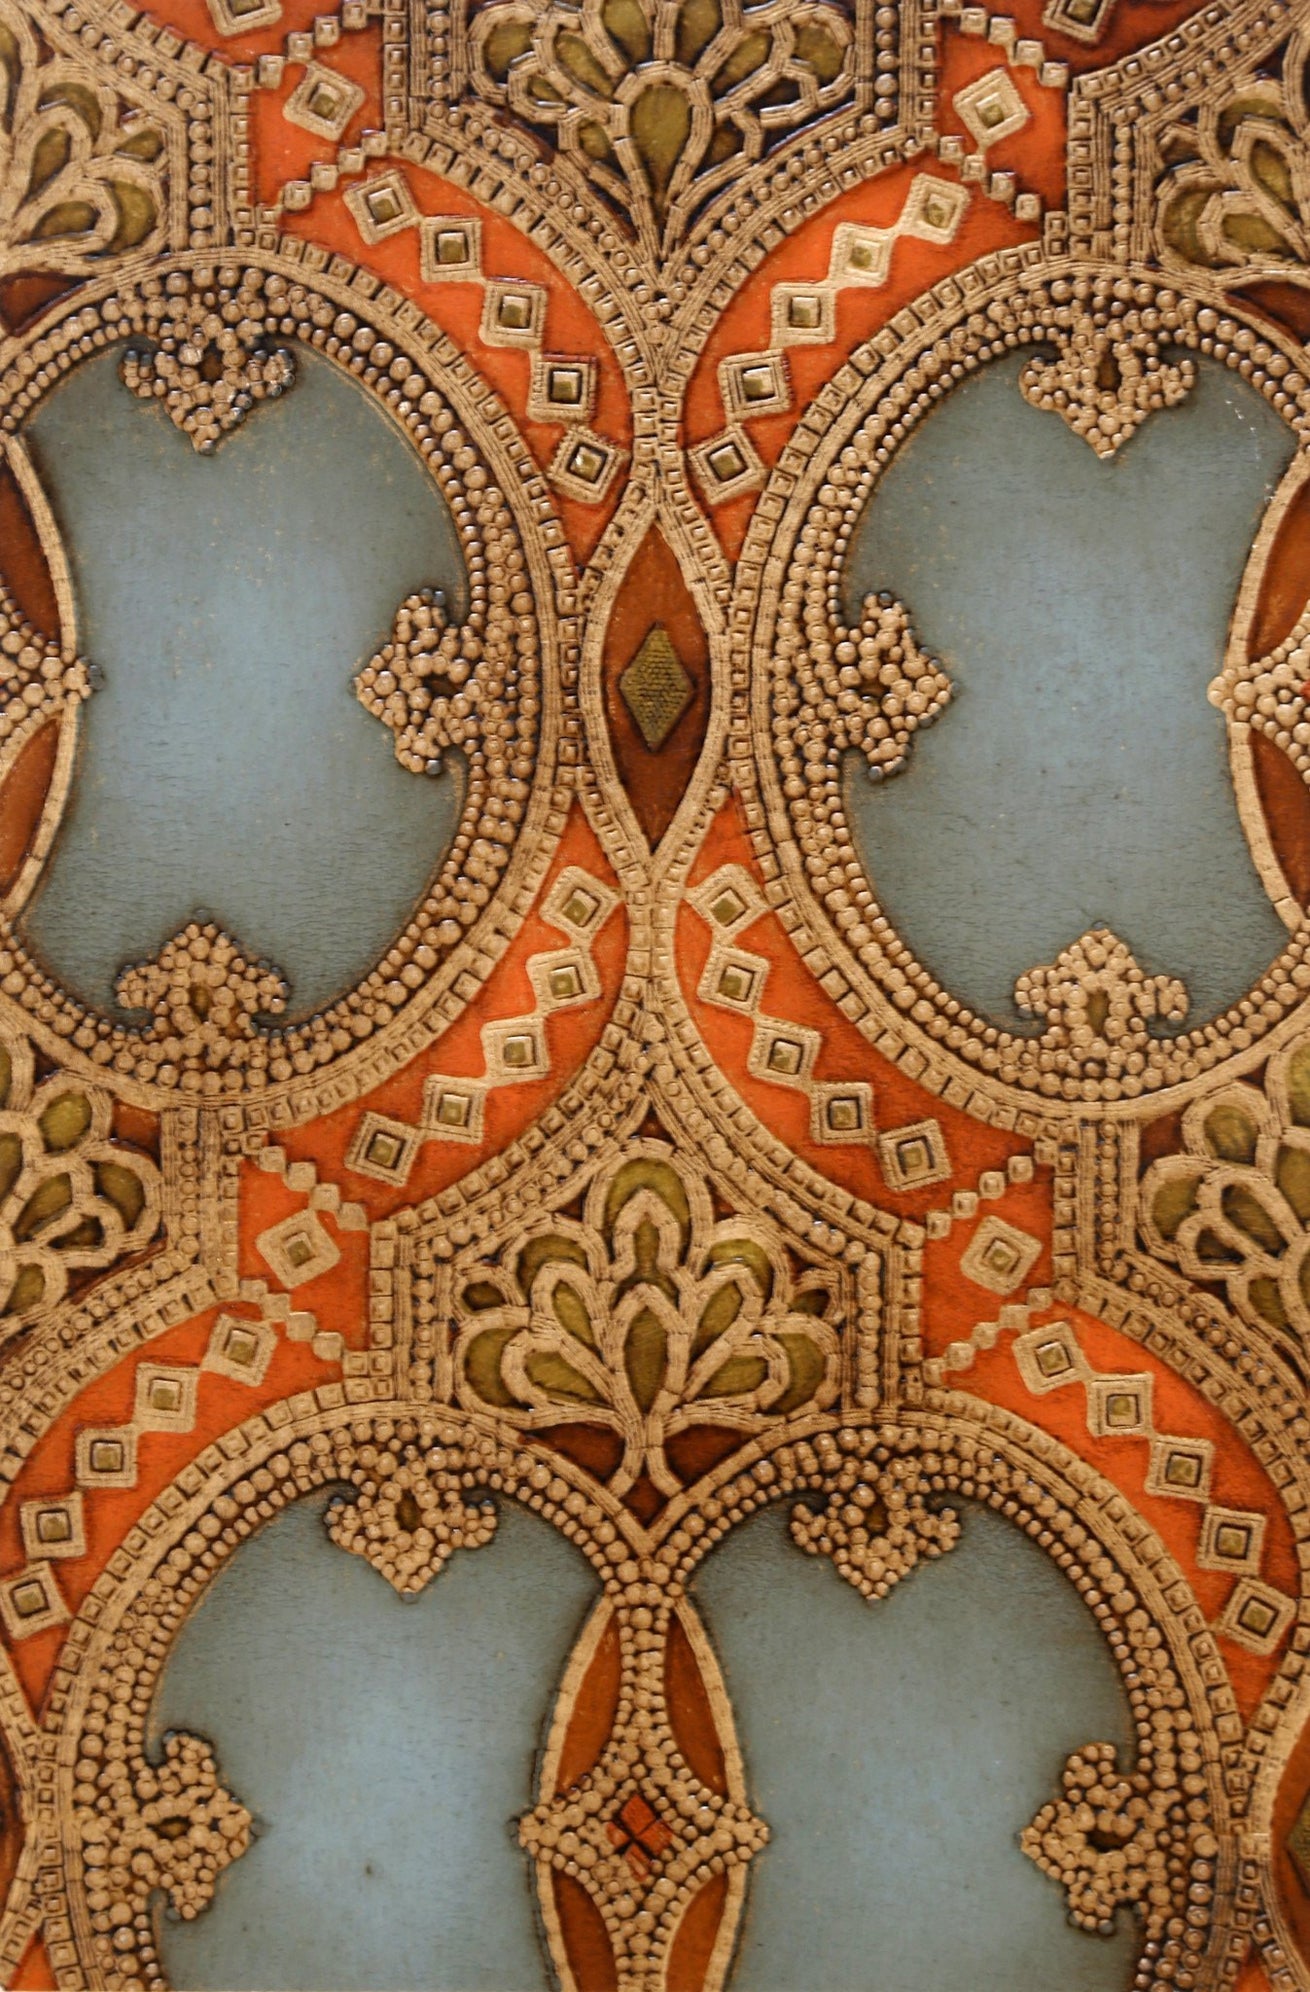 Tooled Double-Oval "Leather" Sidewall - Mounted Antique Wallpaper Panel